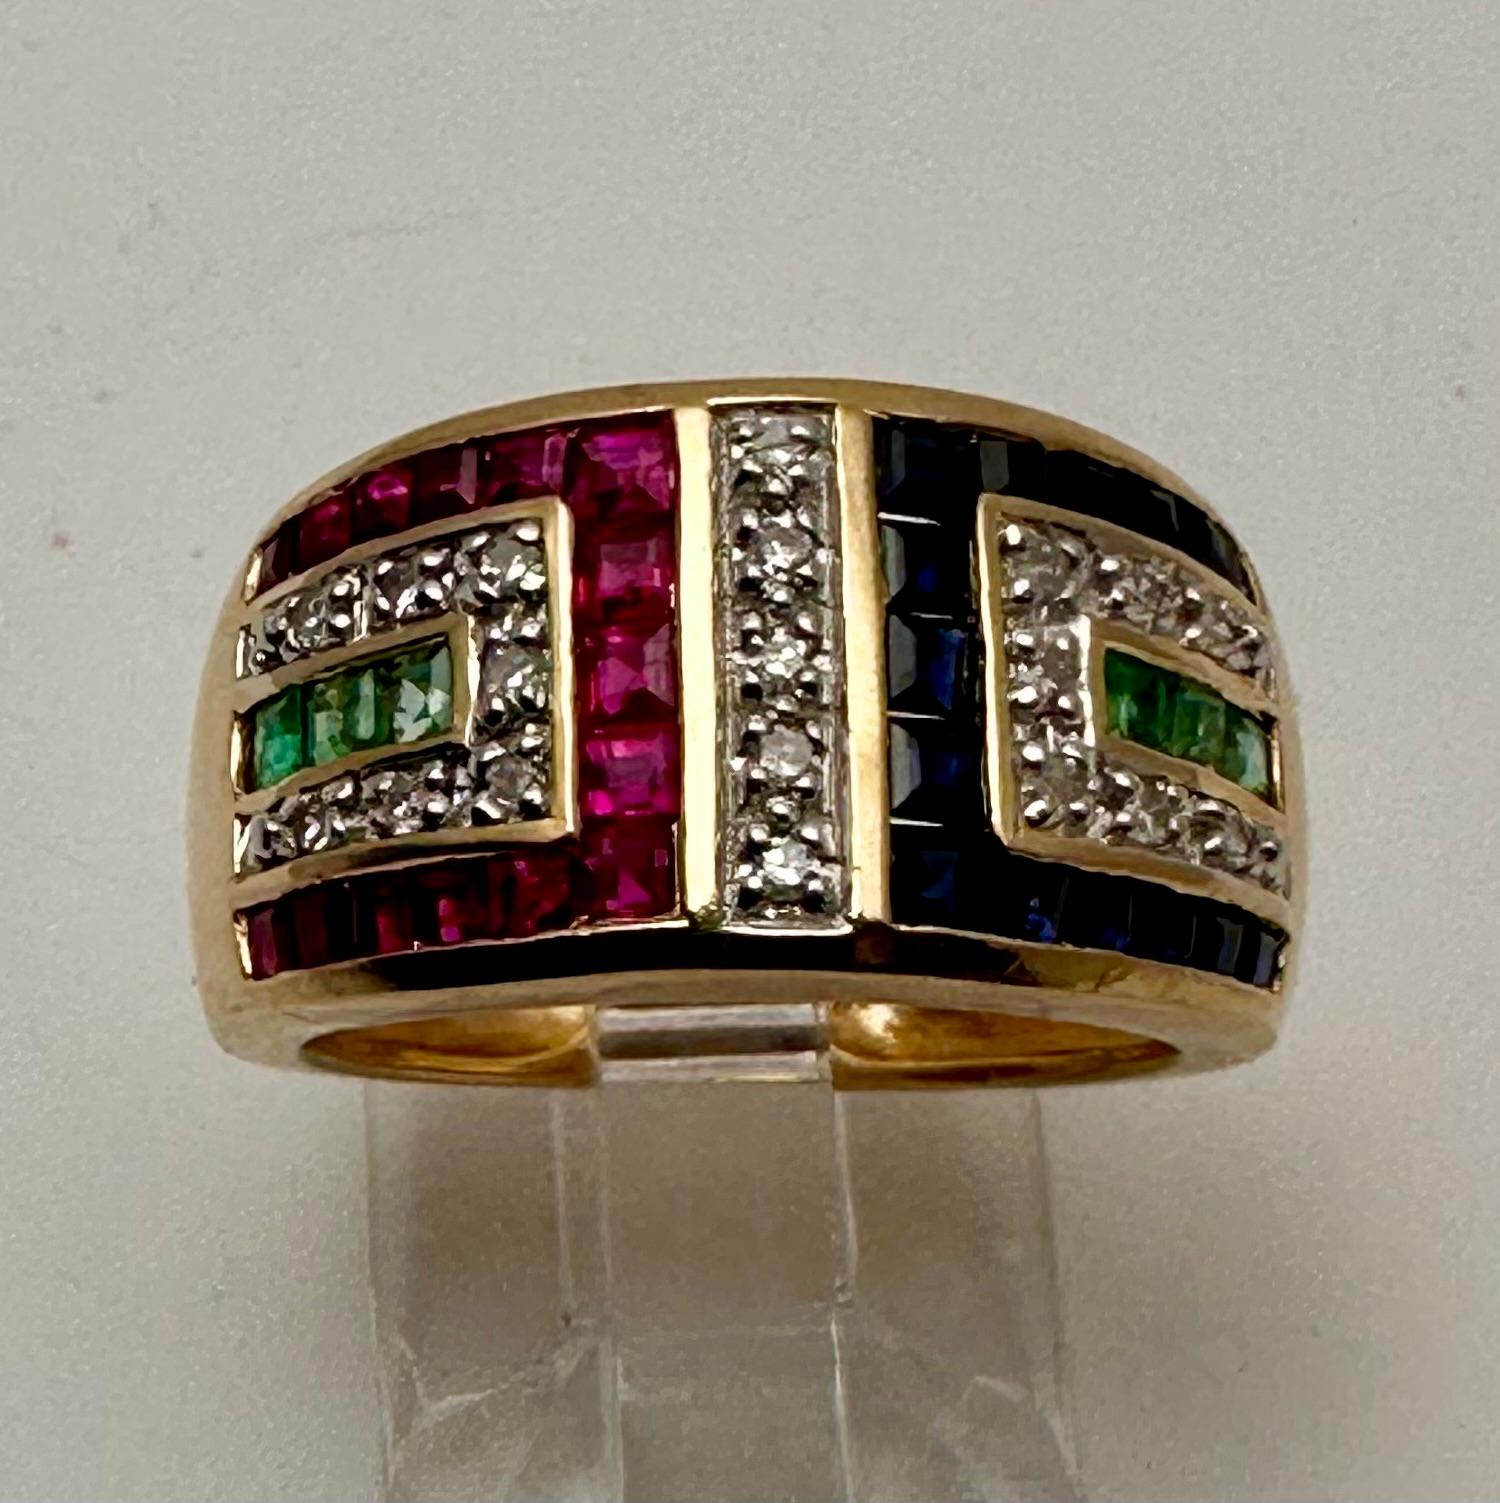 14k Yellow Gold 10.5 mm Wide Ruby Sapphire Diamond and Emerald Ring Size 5. Colored stones are princess cut with 12 round diamonds.
RUBY
This vibrant, gem-like baby name is often associated with wealth, health, passion, and success in love,